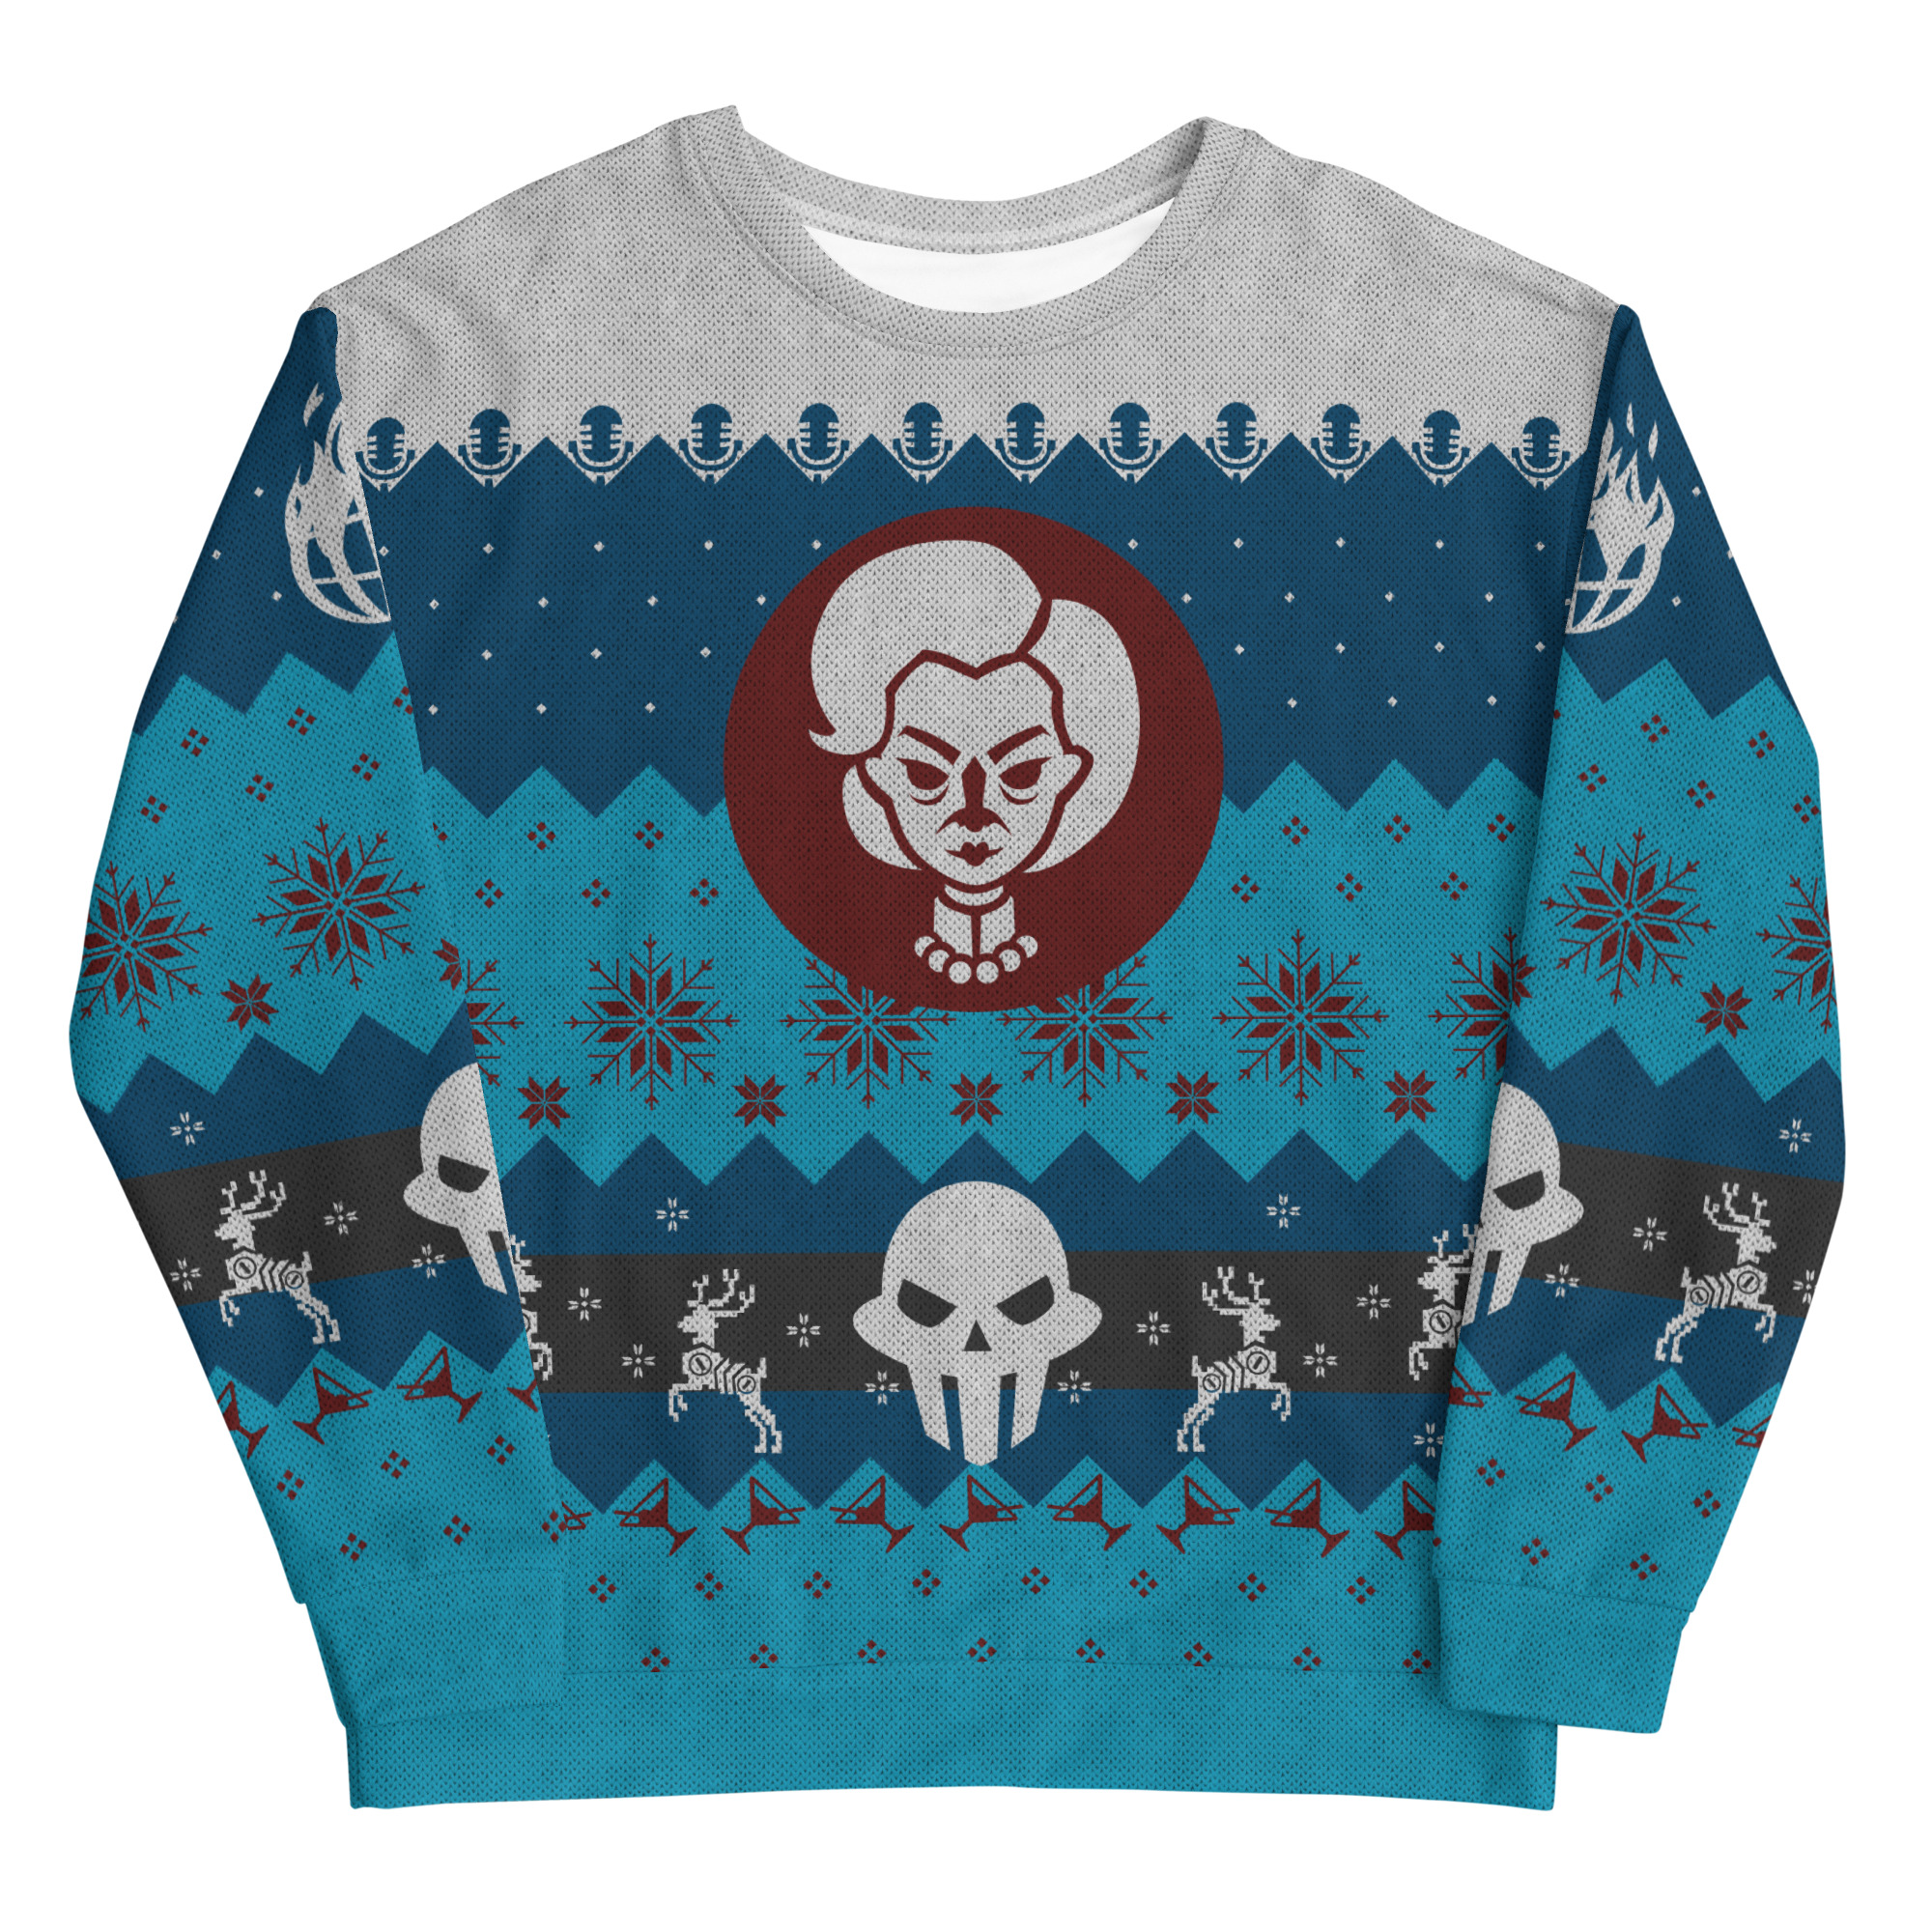 An image of a Christmas jumper with blue, white and black colour scheme with motifs from Evil Genius 2